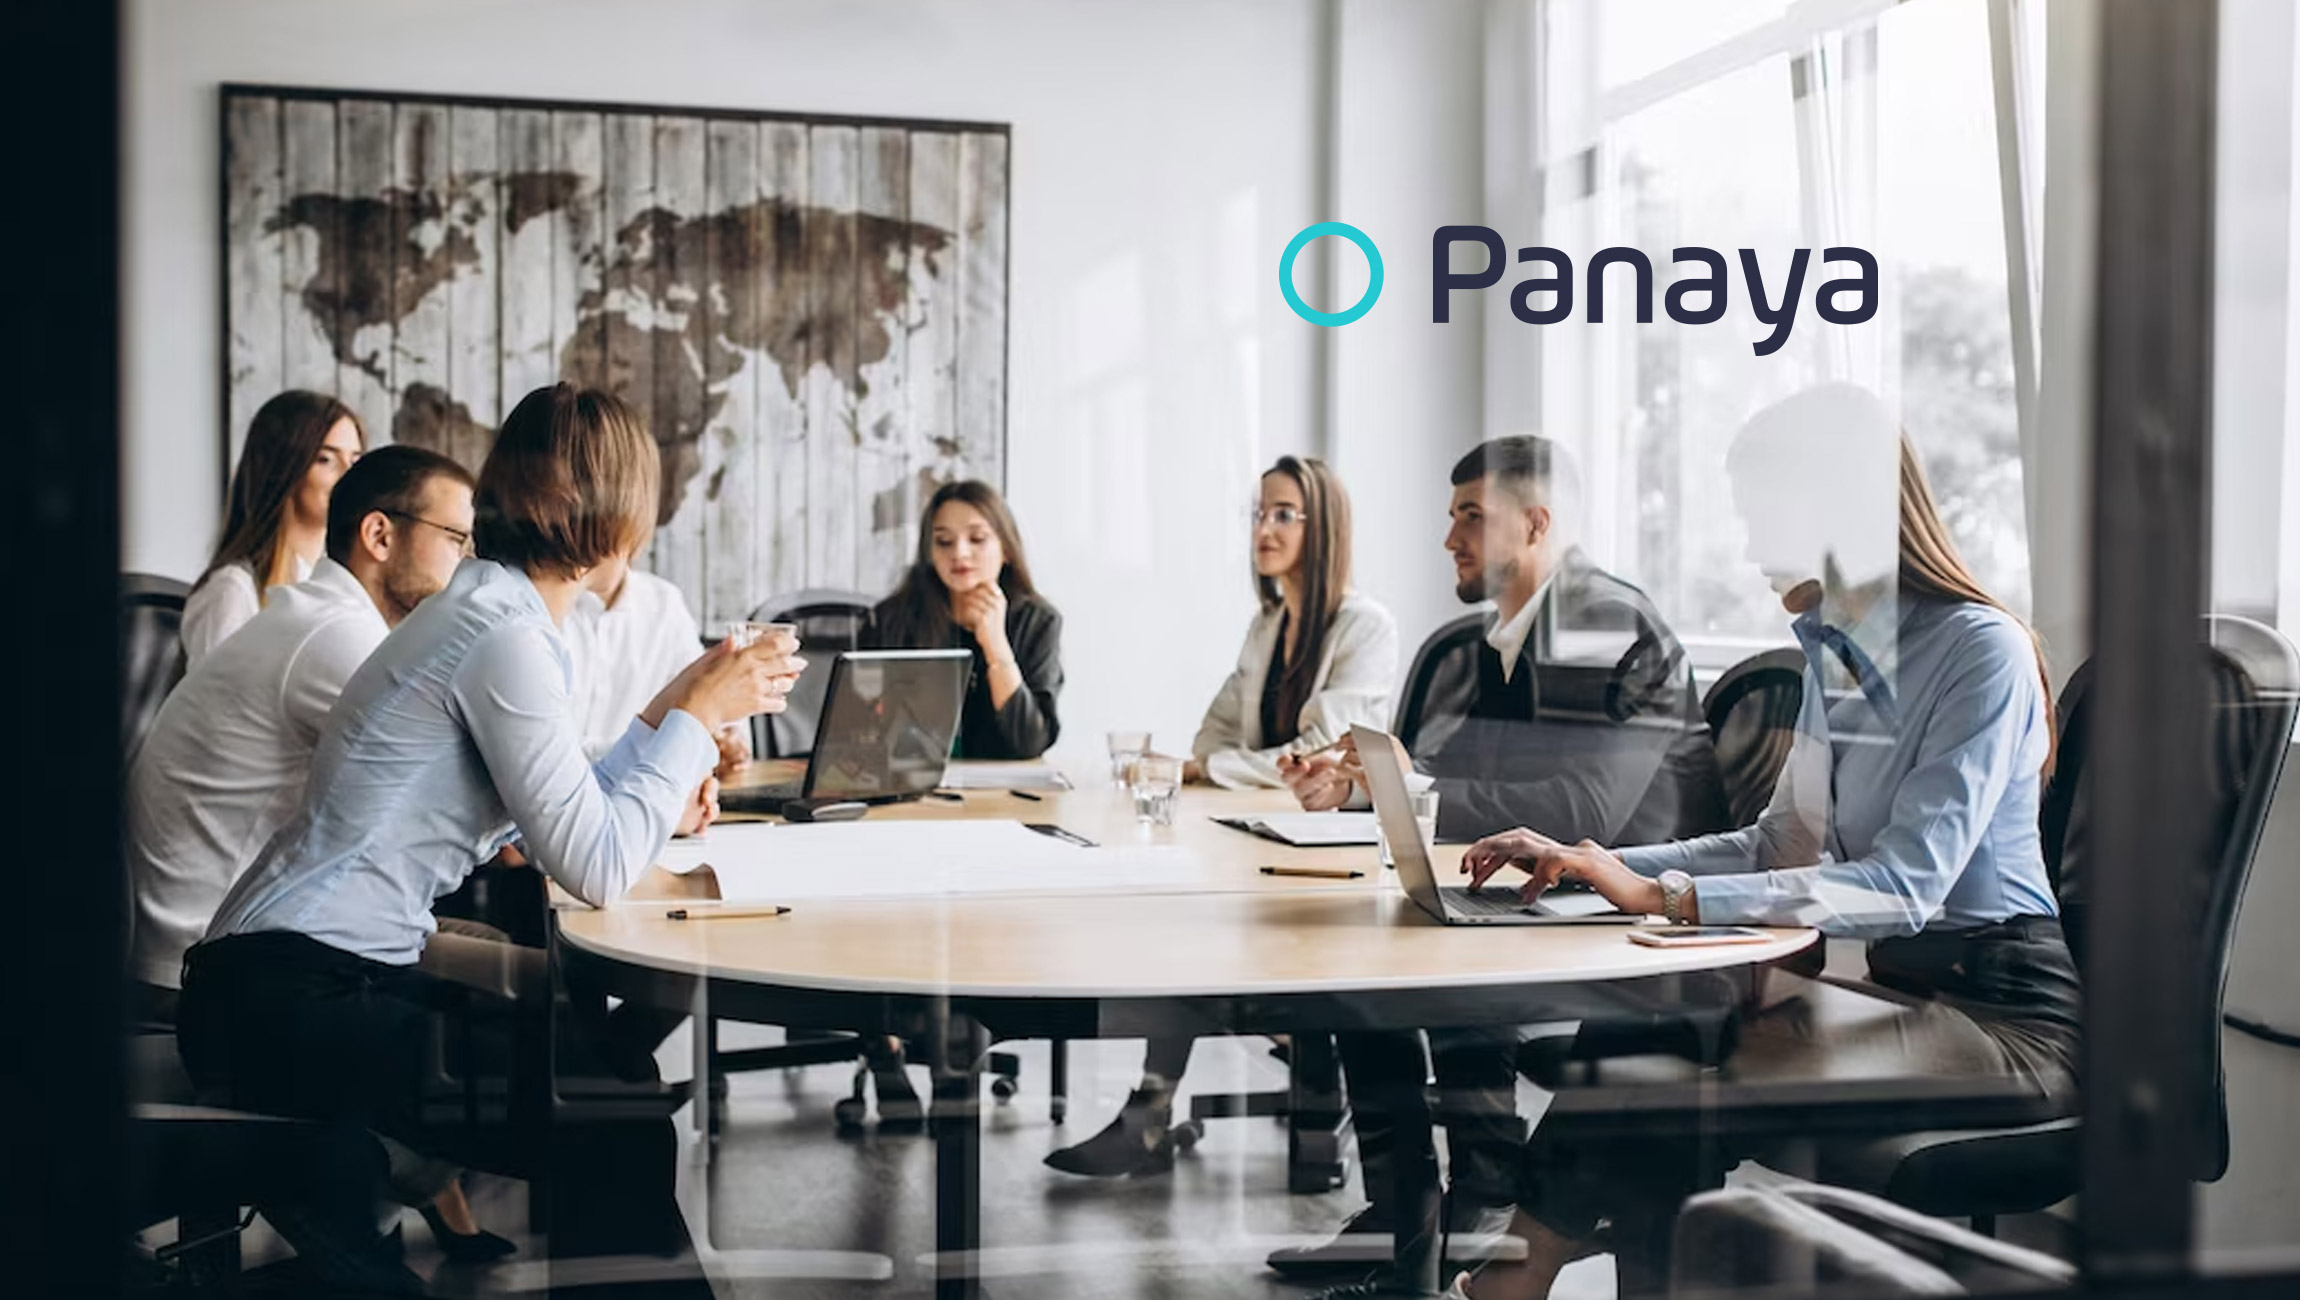 Panaya Unveils "Change Watch" to Keep Track of Salesforce Metadata Changes - Within and Across the Salesforce Orgs.